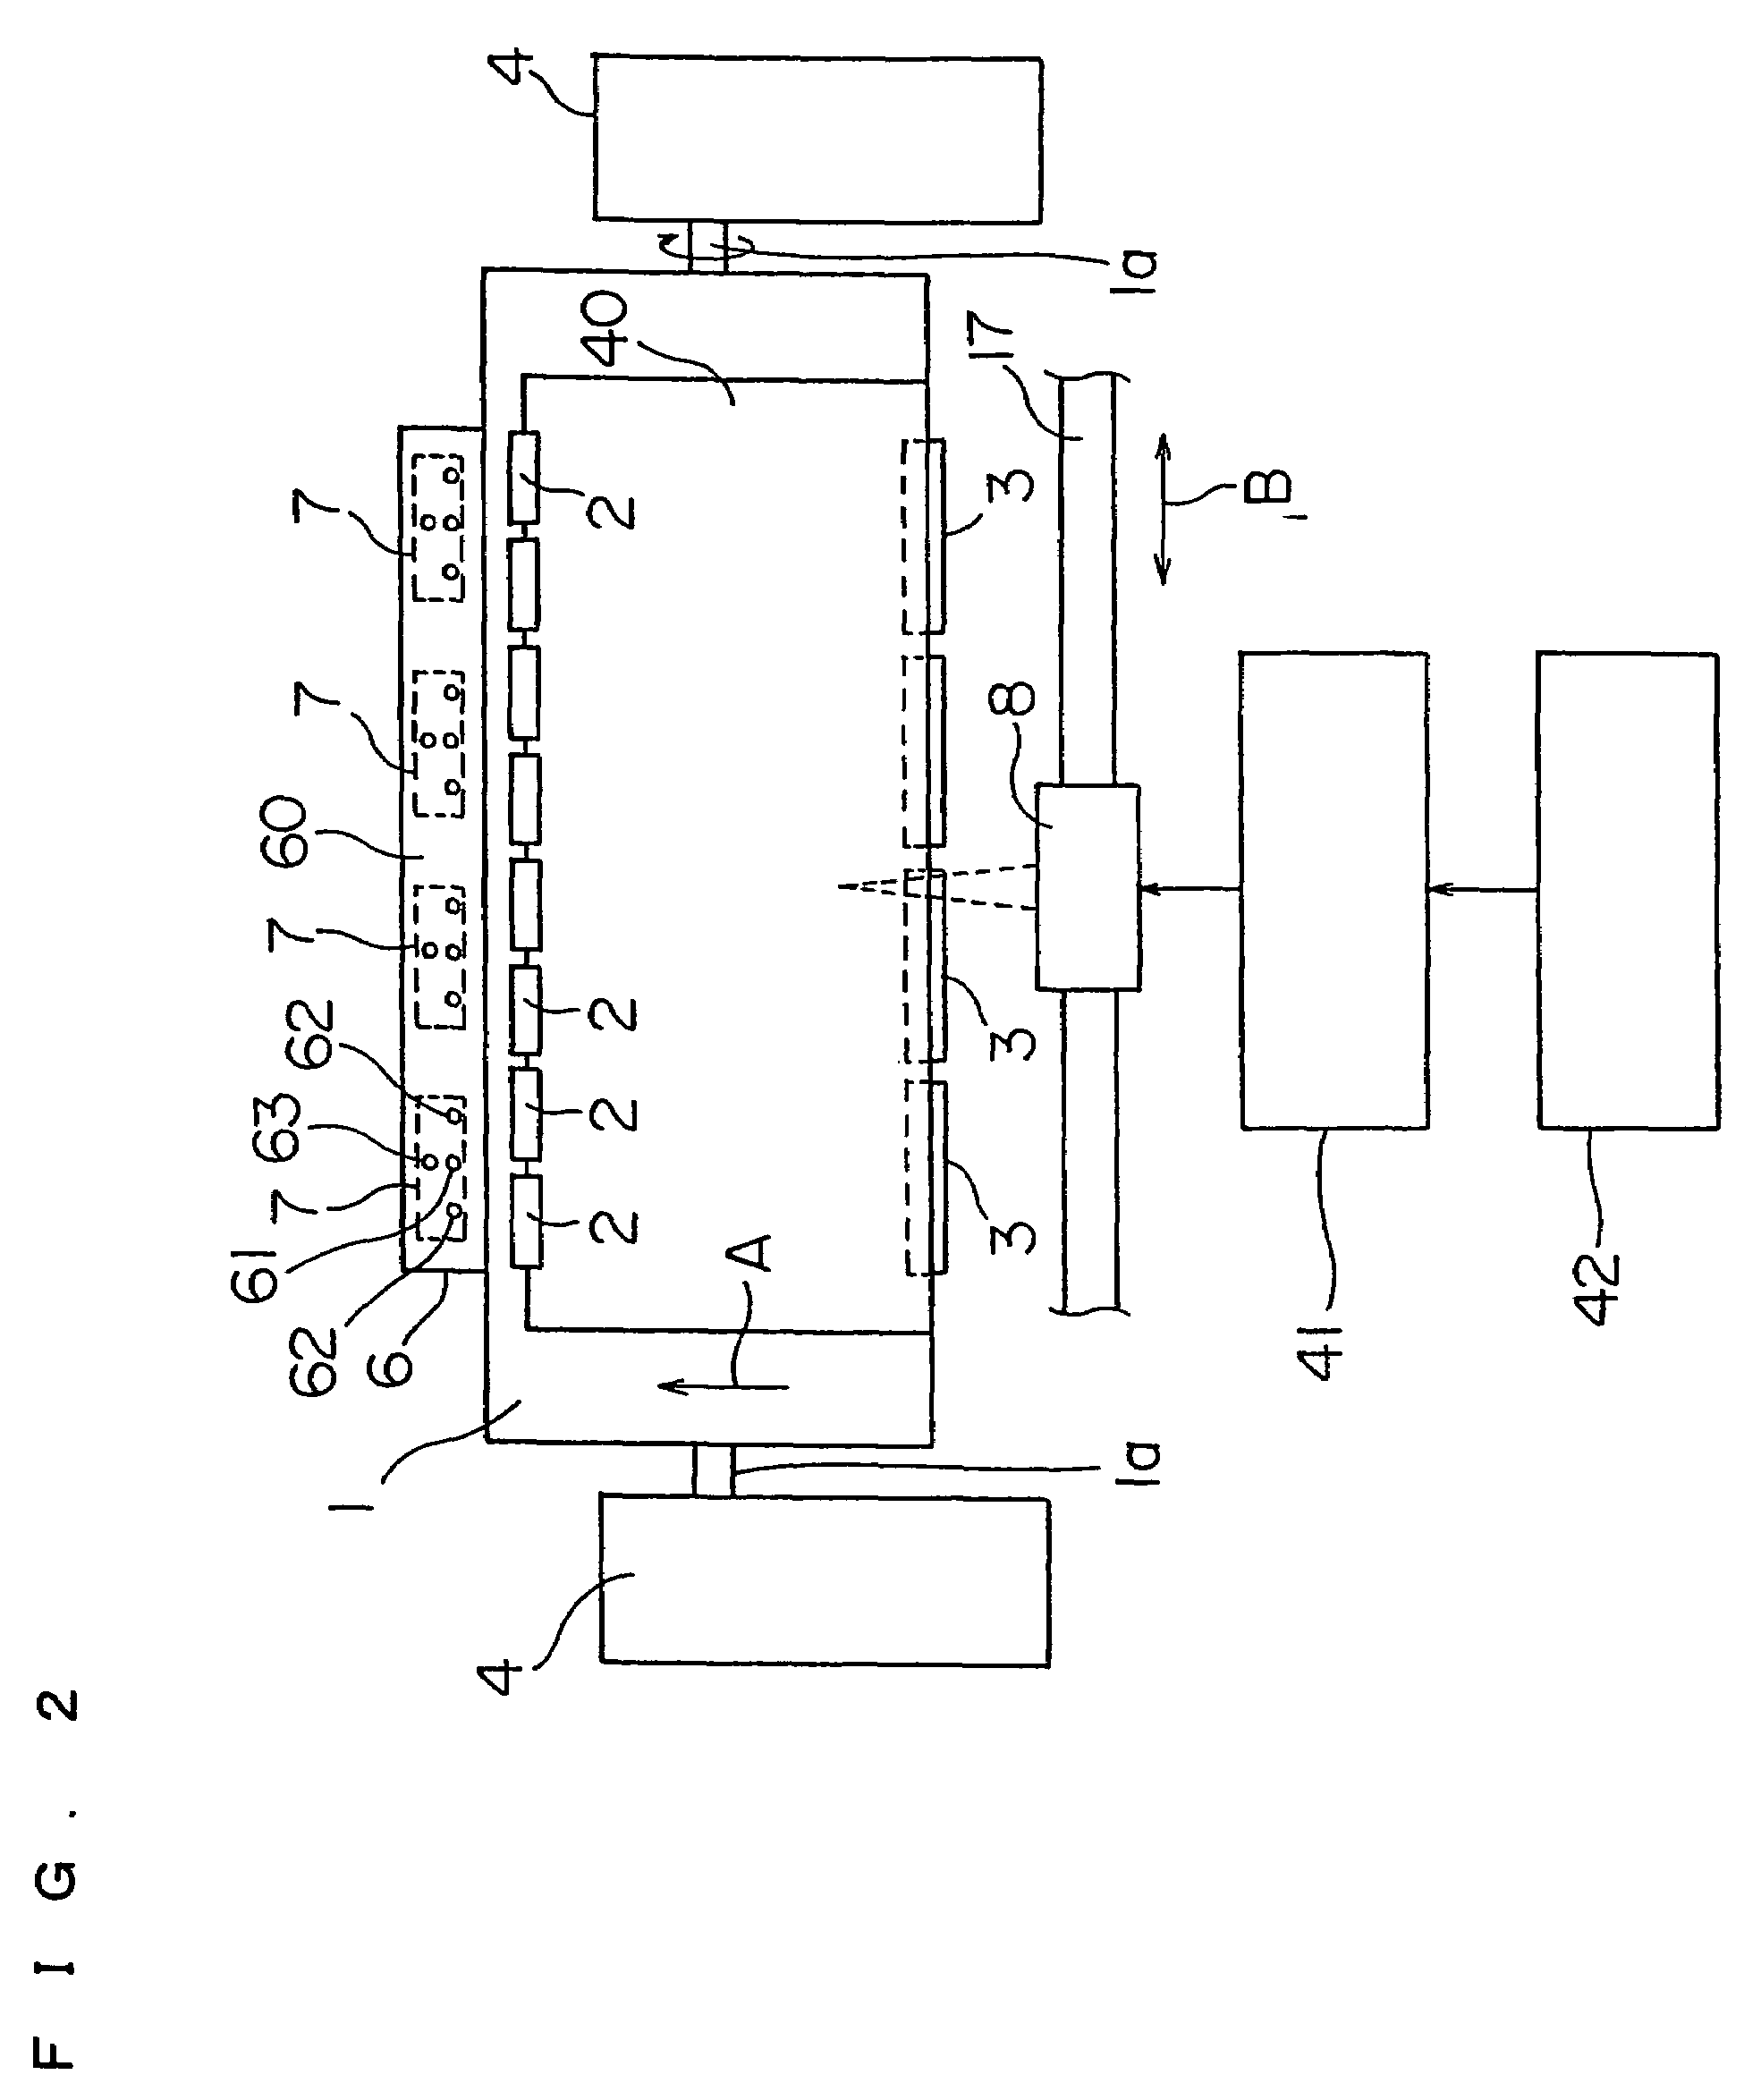 Image recording apparatus with jet and suction